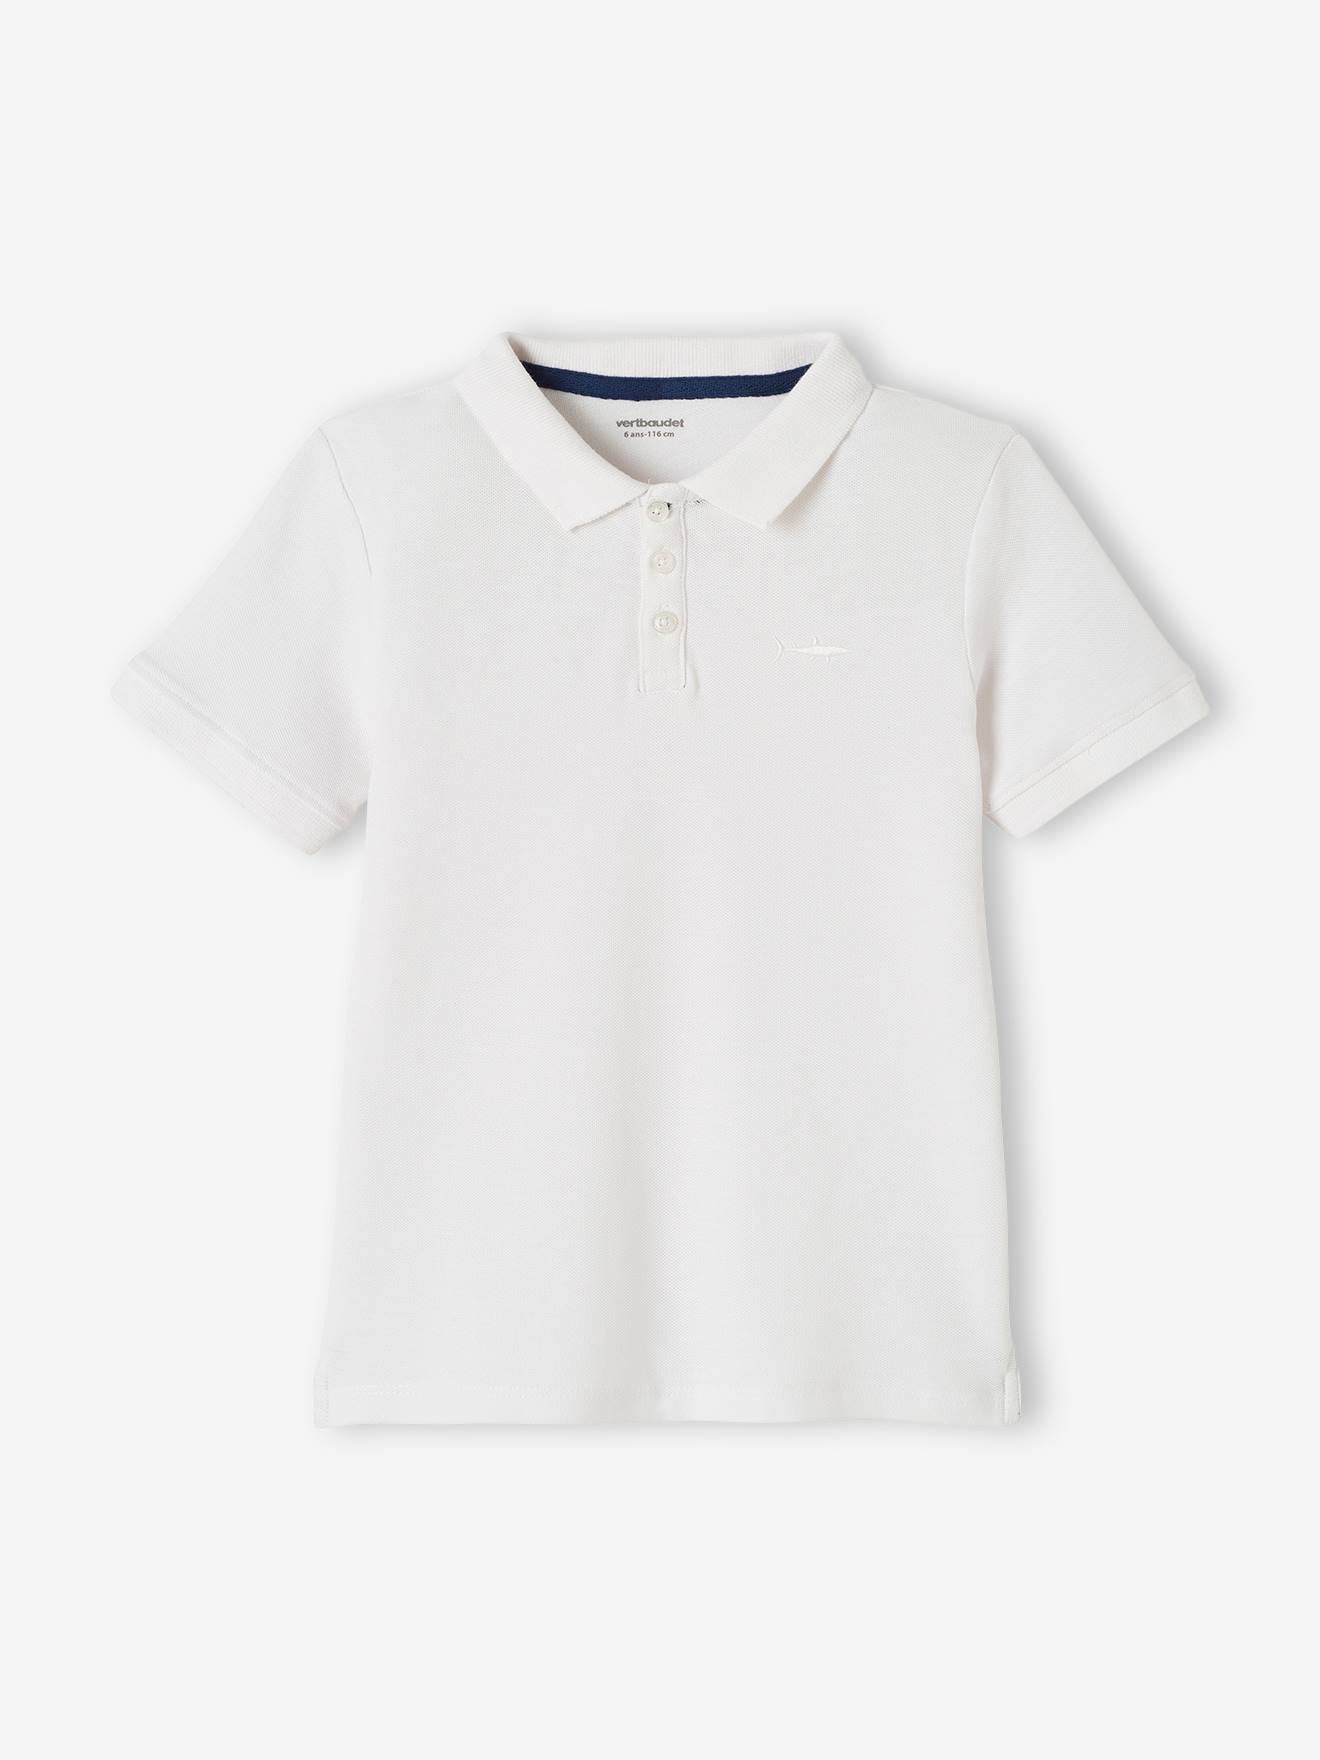 Short Sleeve Polo Shirt, Embroidery on the Chest, for Boys white light solid with design